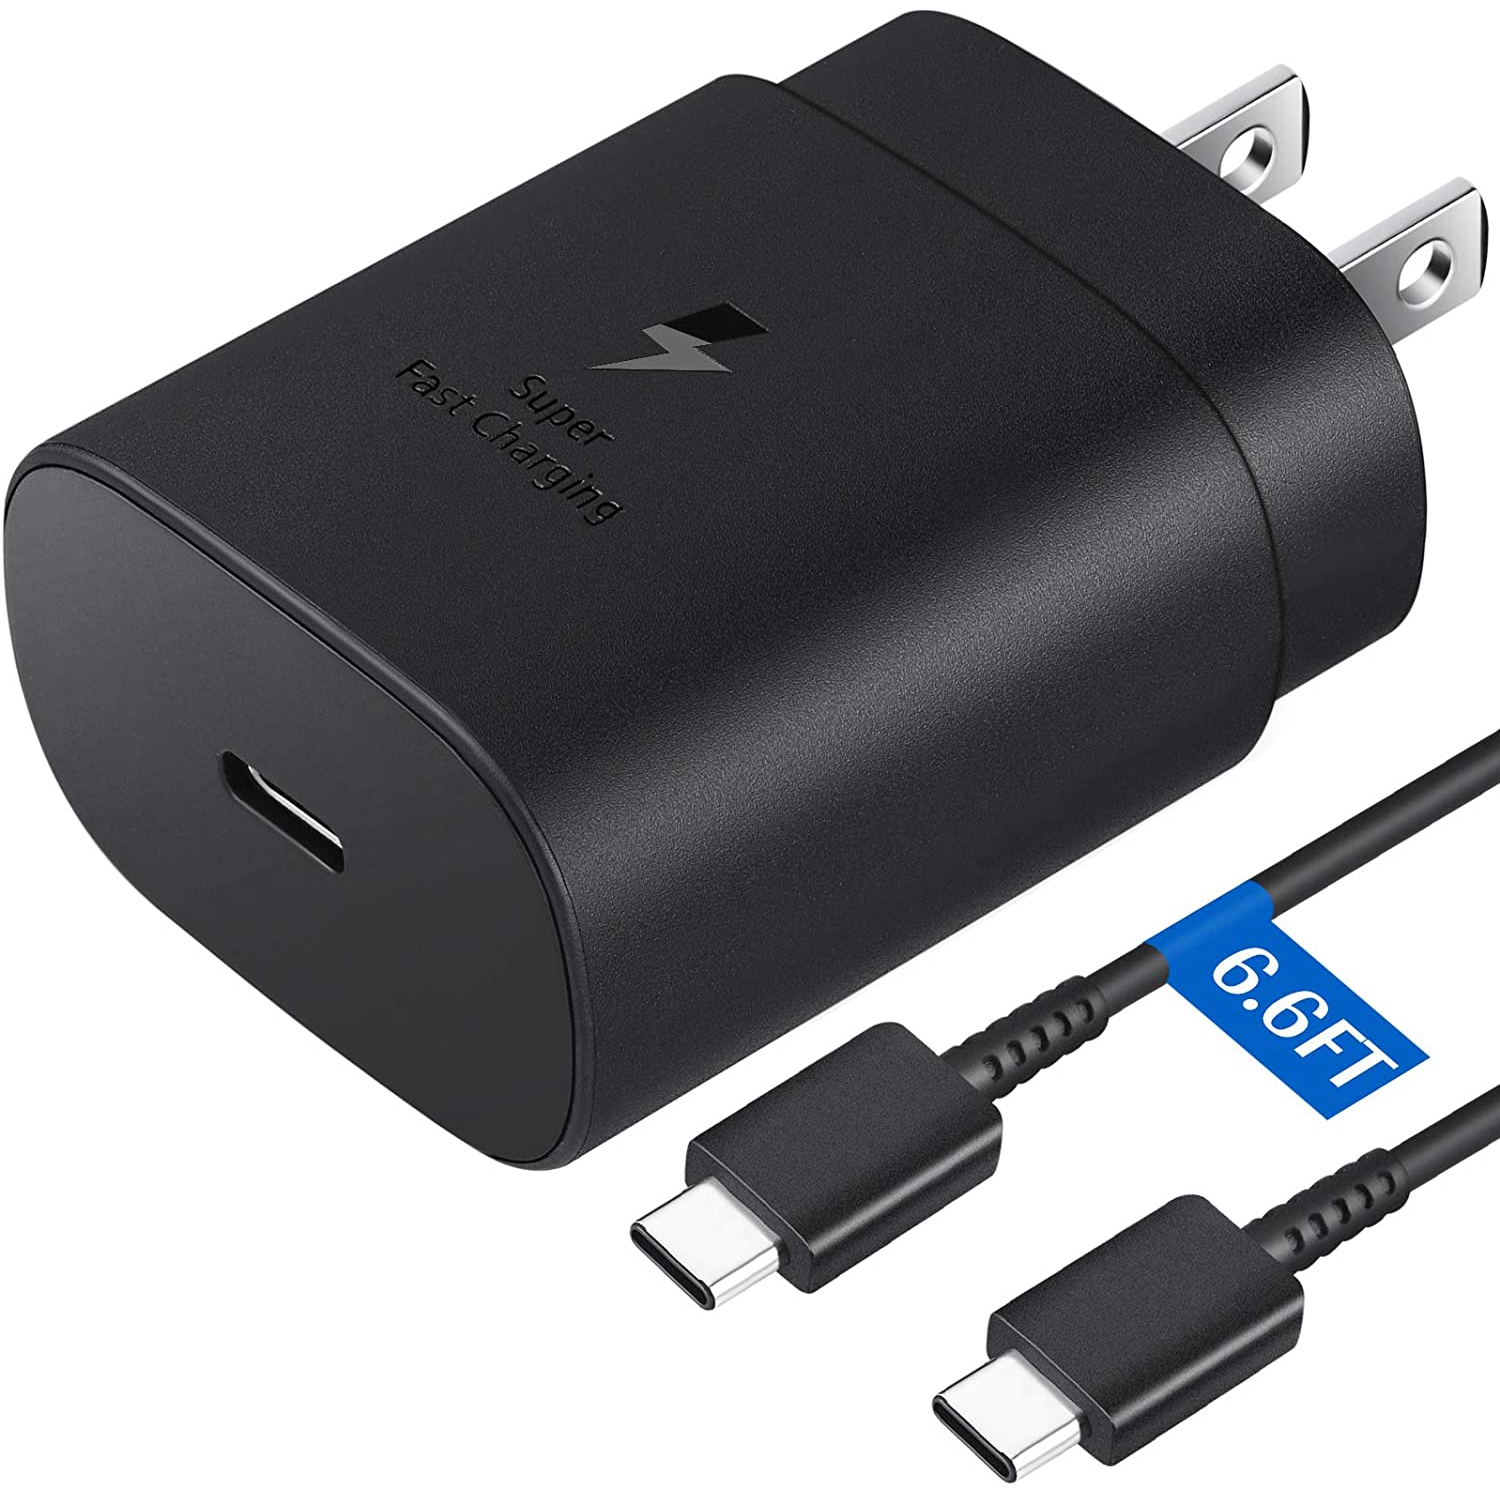 (CABLESHARK) Super Fast Charger, 25W USB C Fast Charger and 6FT USB C to C Fast Cable COMPATIBLE for Samsung Galaxy S21/S21+/S21 Ultra/S20/S20+/S20 Ultra/Note 20/Note 20 Ultra/Note 10/Note10+